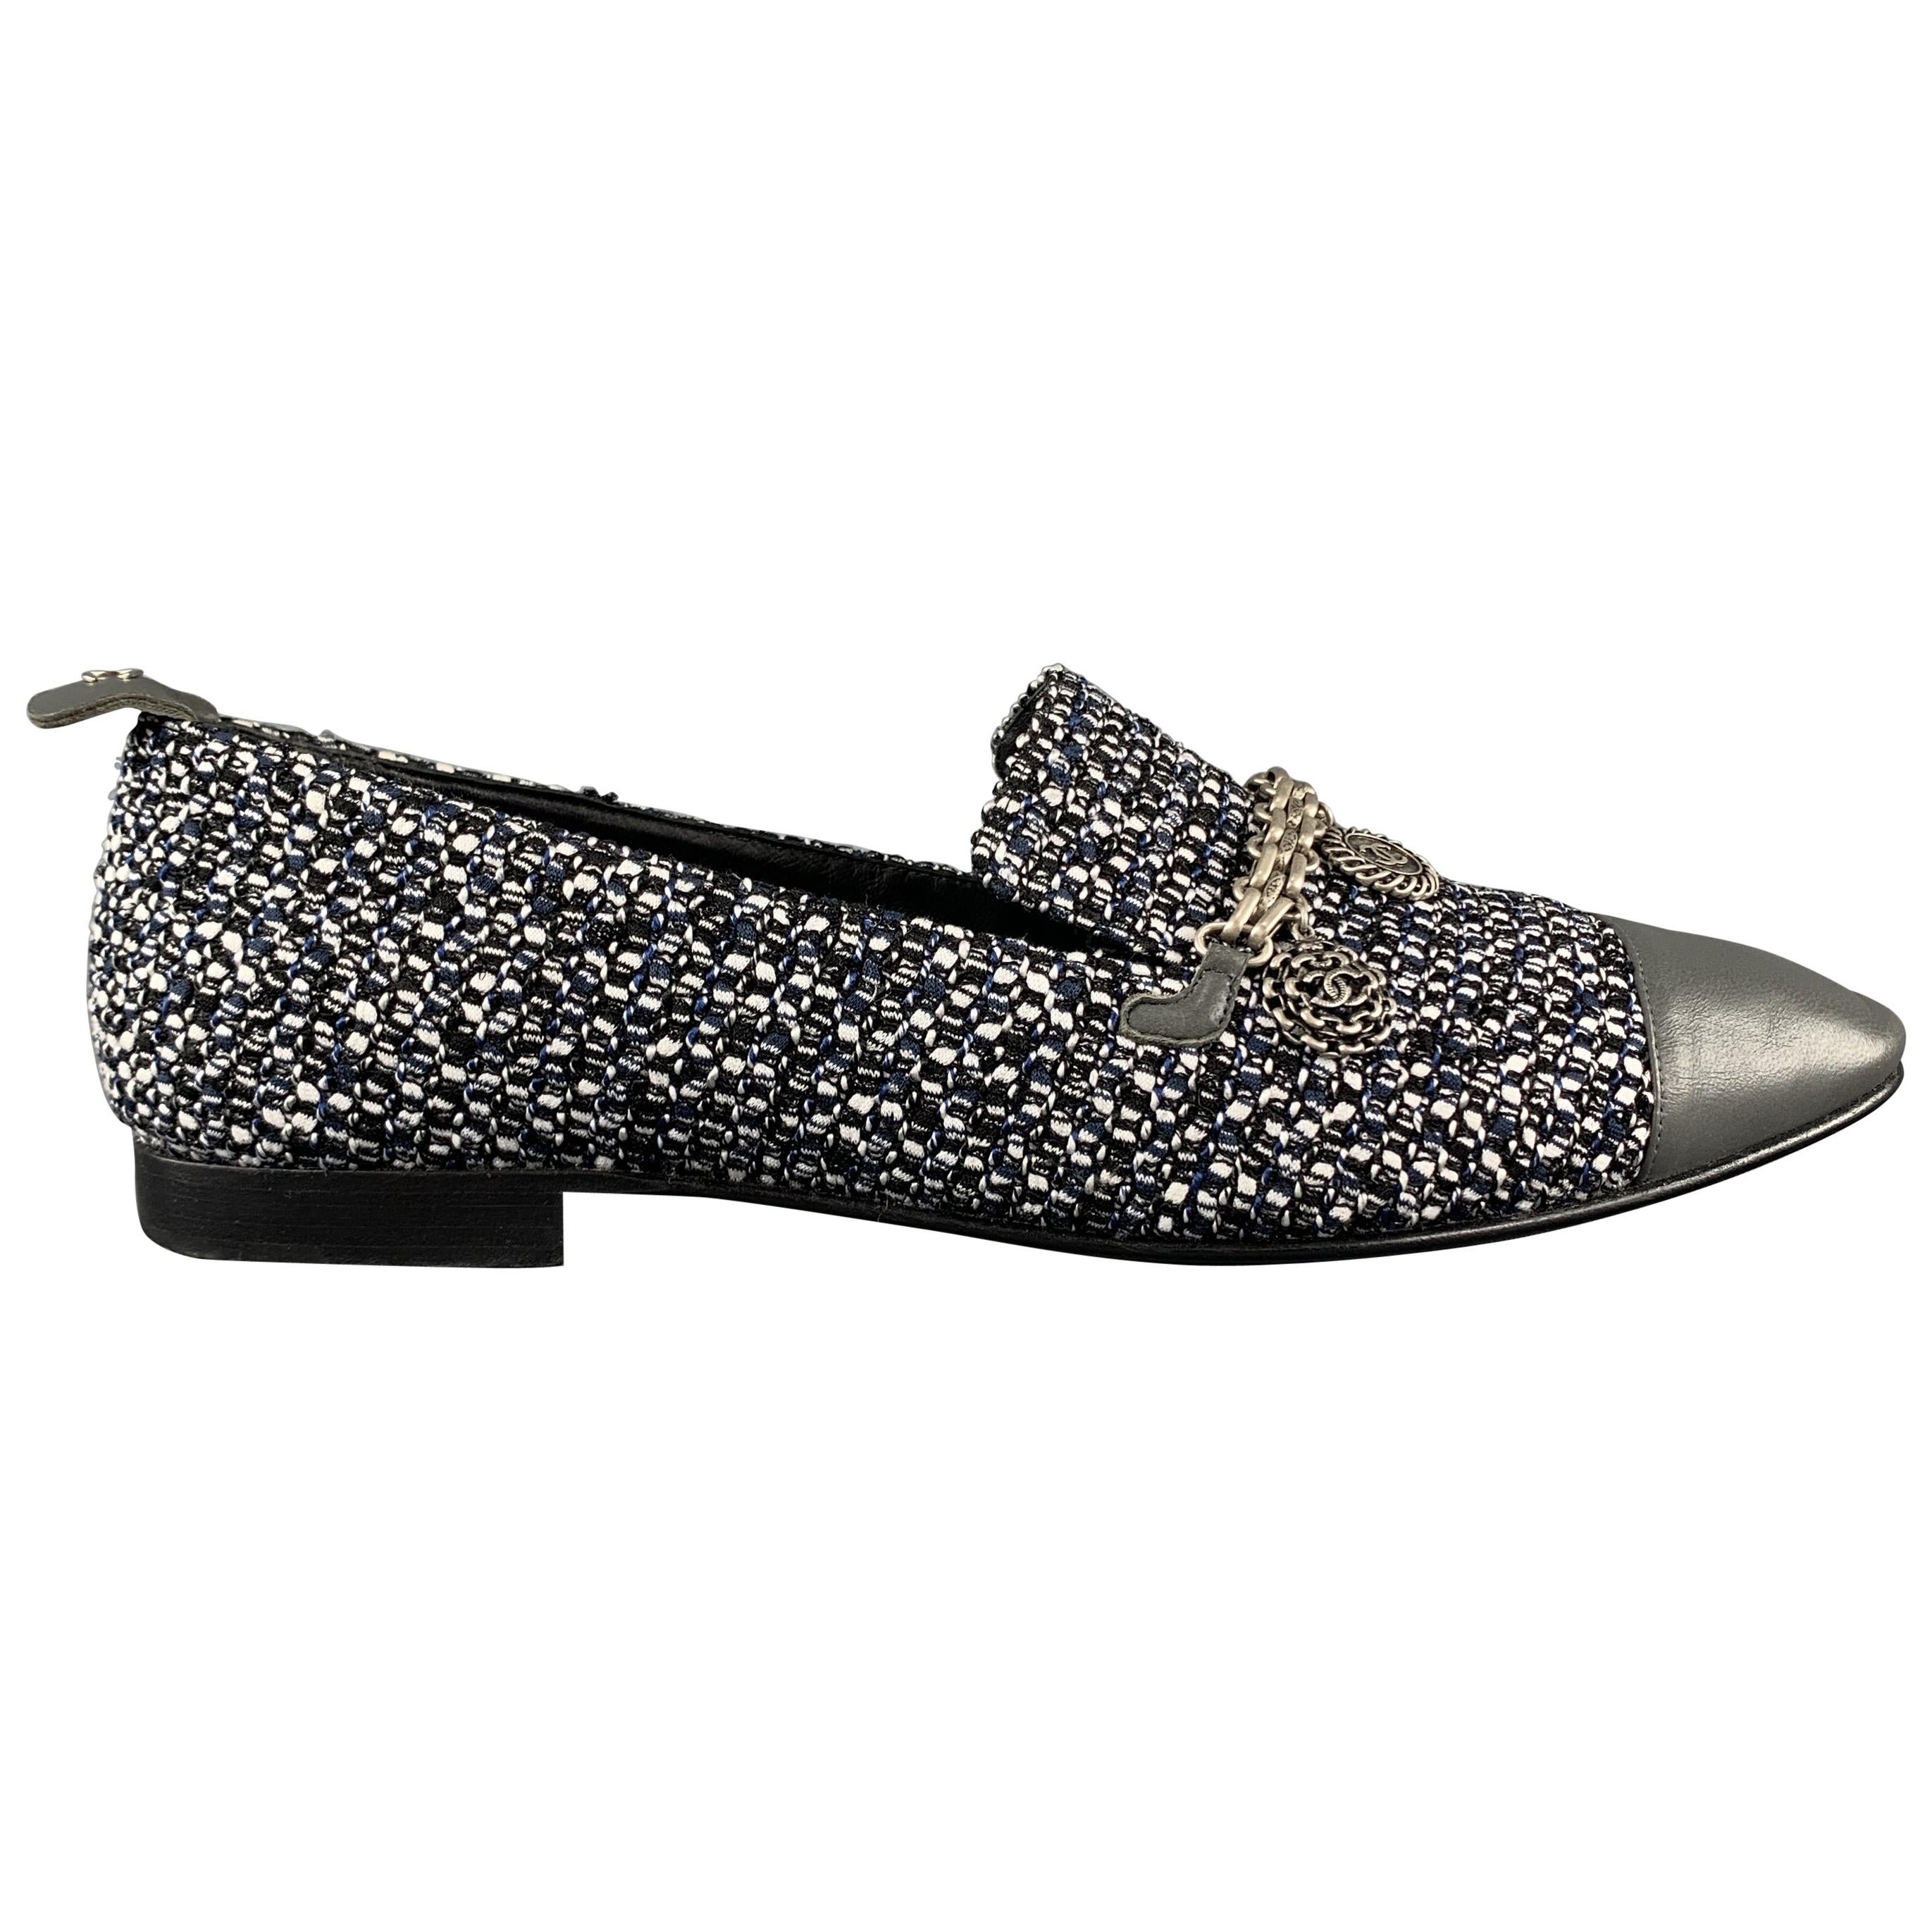 CHANEL Size 10.5 Grey Tweed Loafer Flats